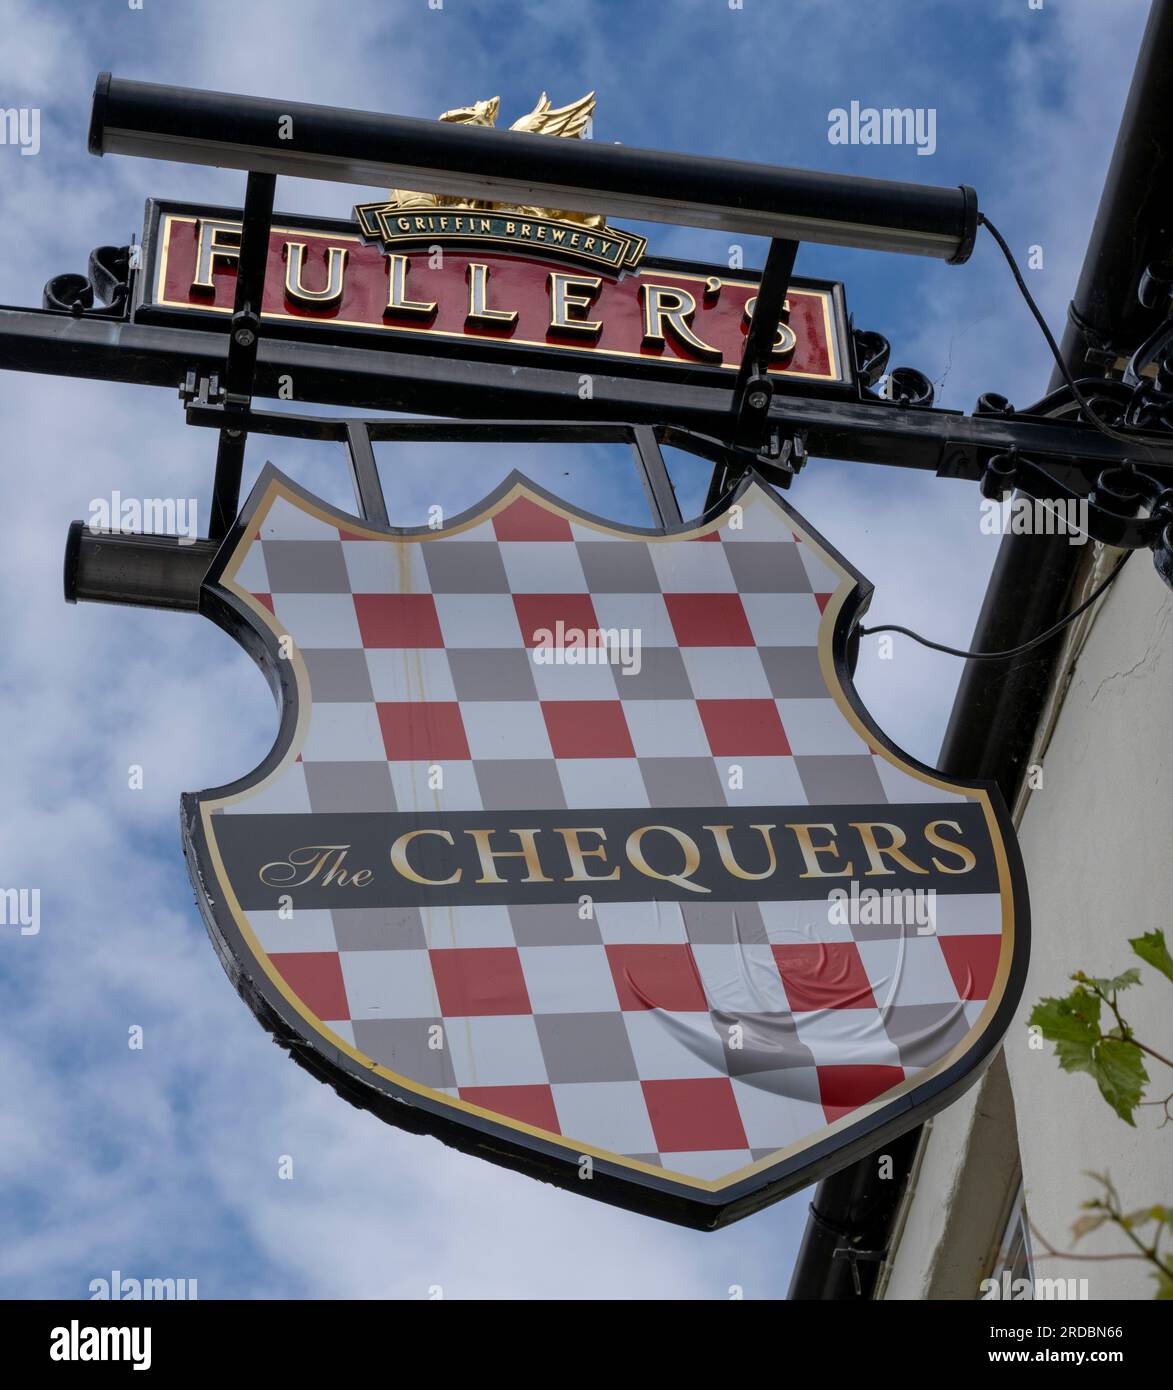 Traditional hanging pub sign at The Chequers a Fuller's public house, Goddards Lane, Chipping Norton, Oxfordshire, England, UK Stock Photo